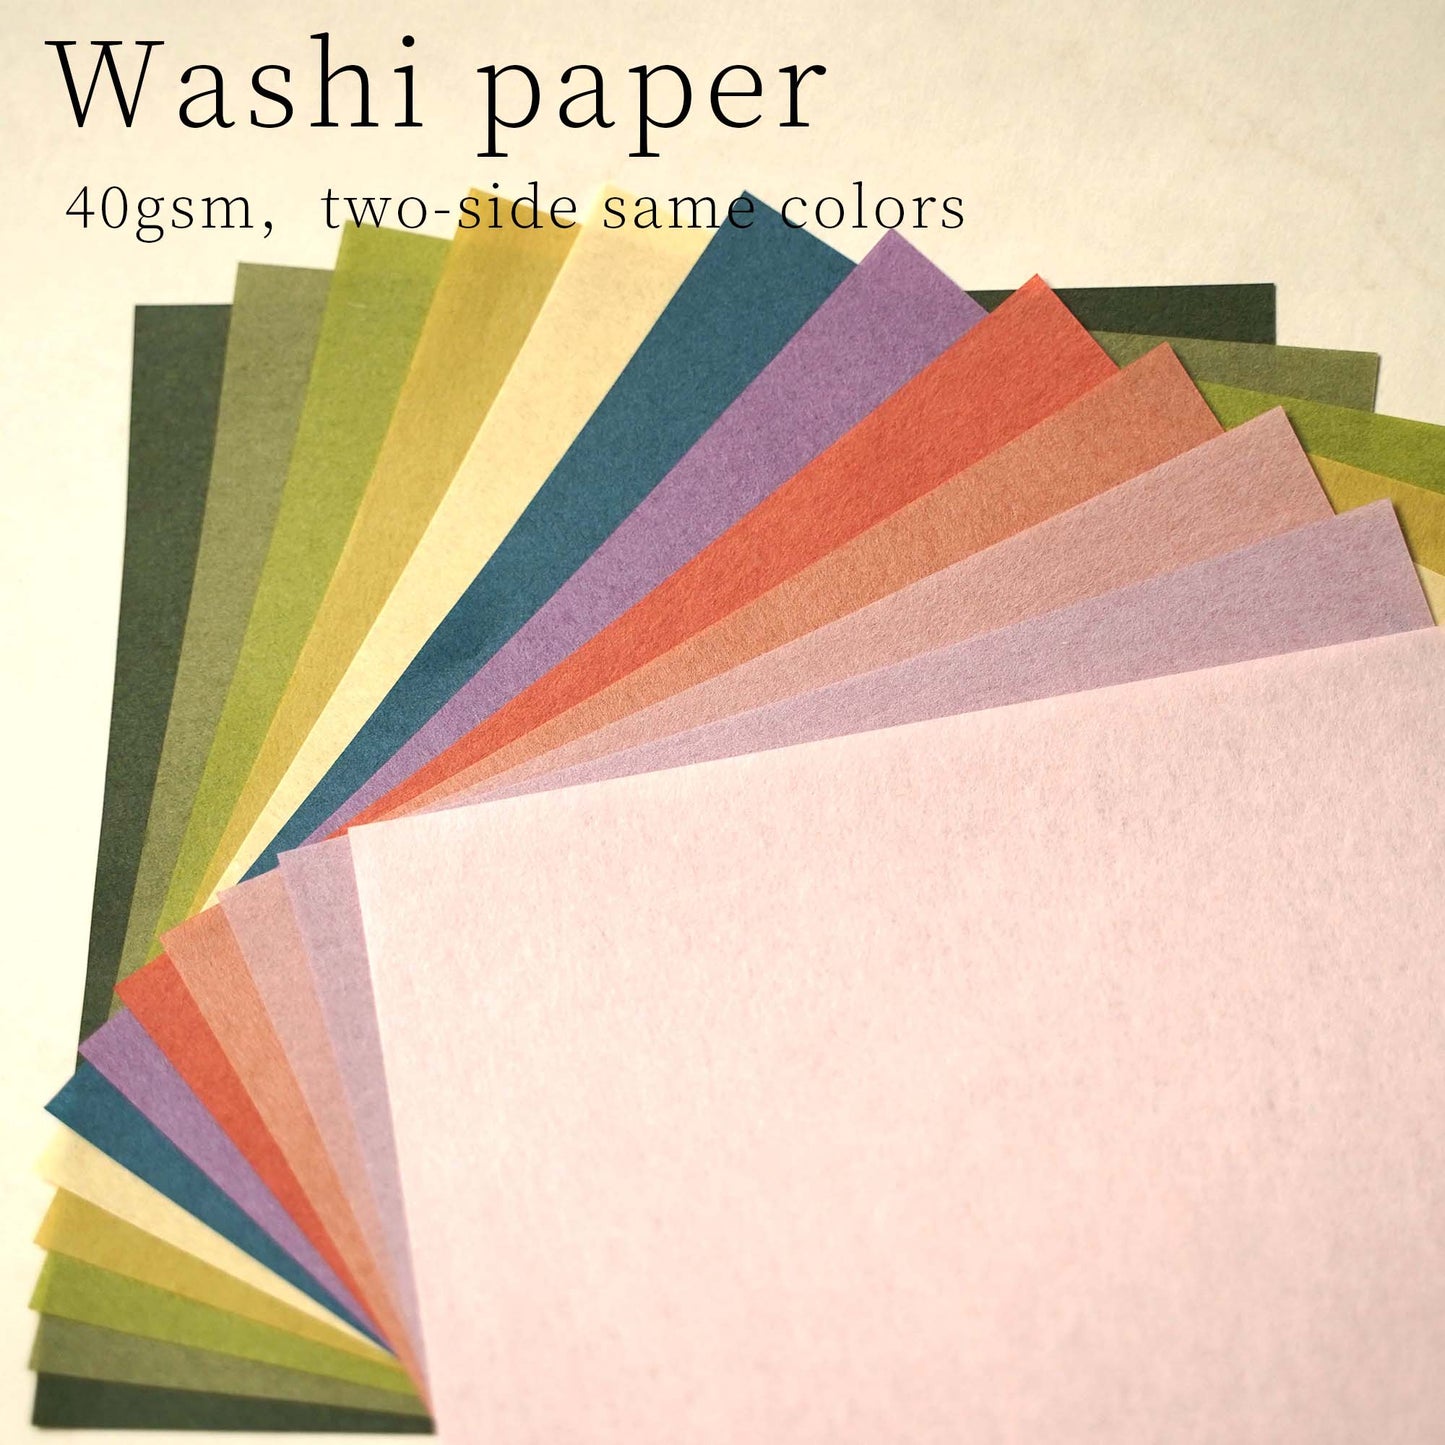 SAOC-Miogami,Washi paper,   Thin and strong, Super Complex Origami